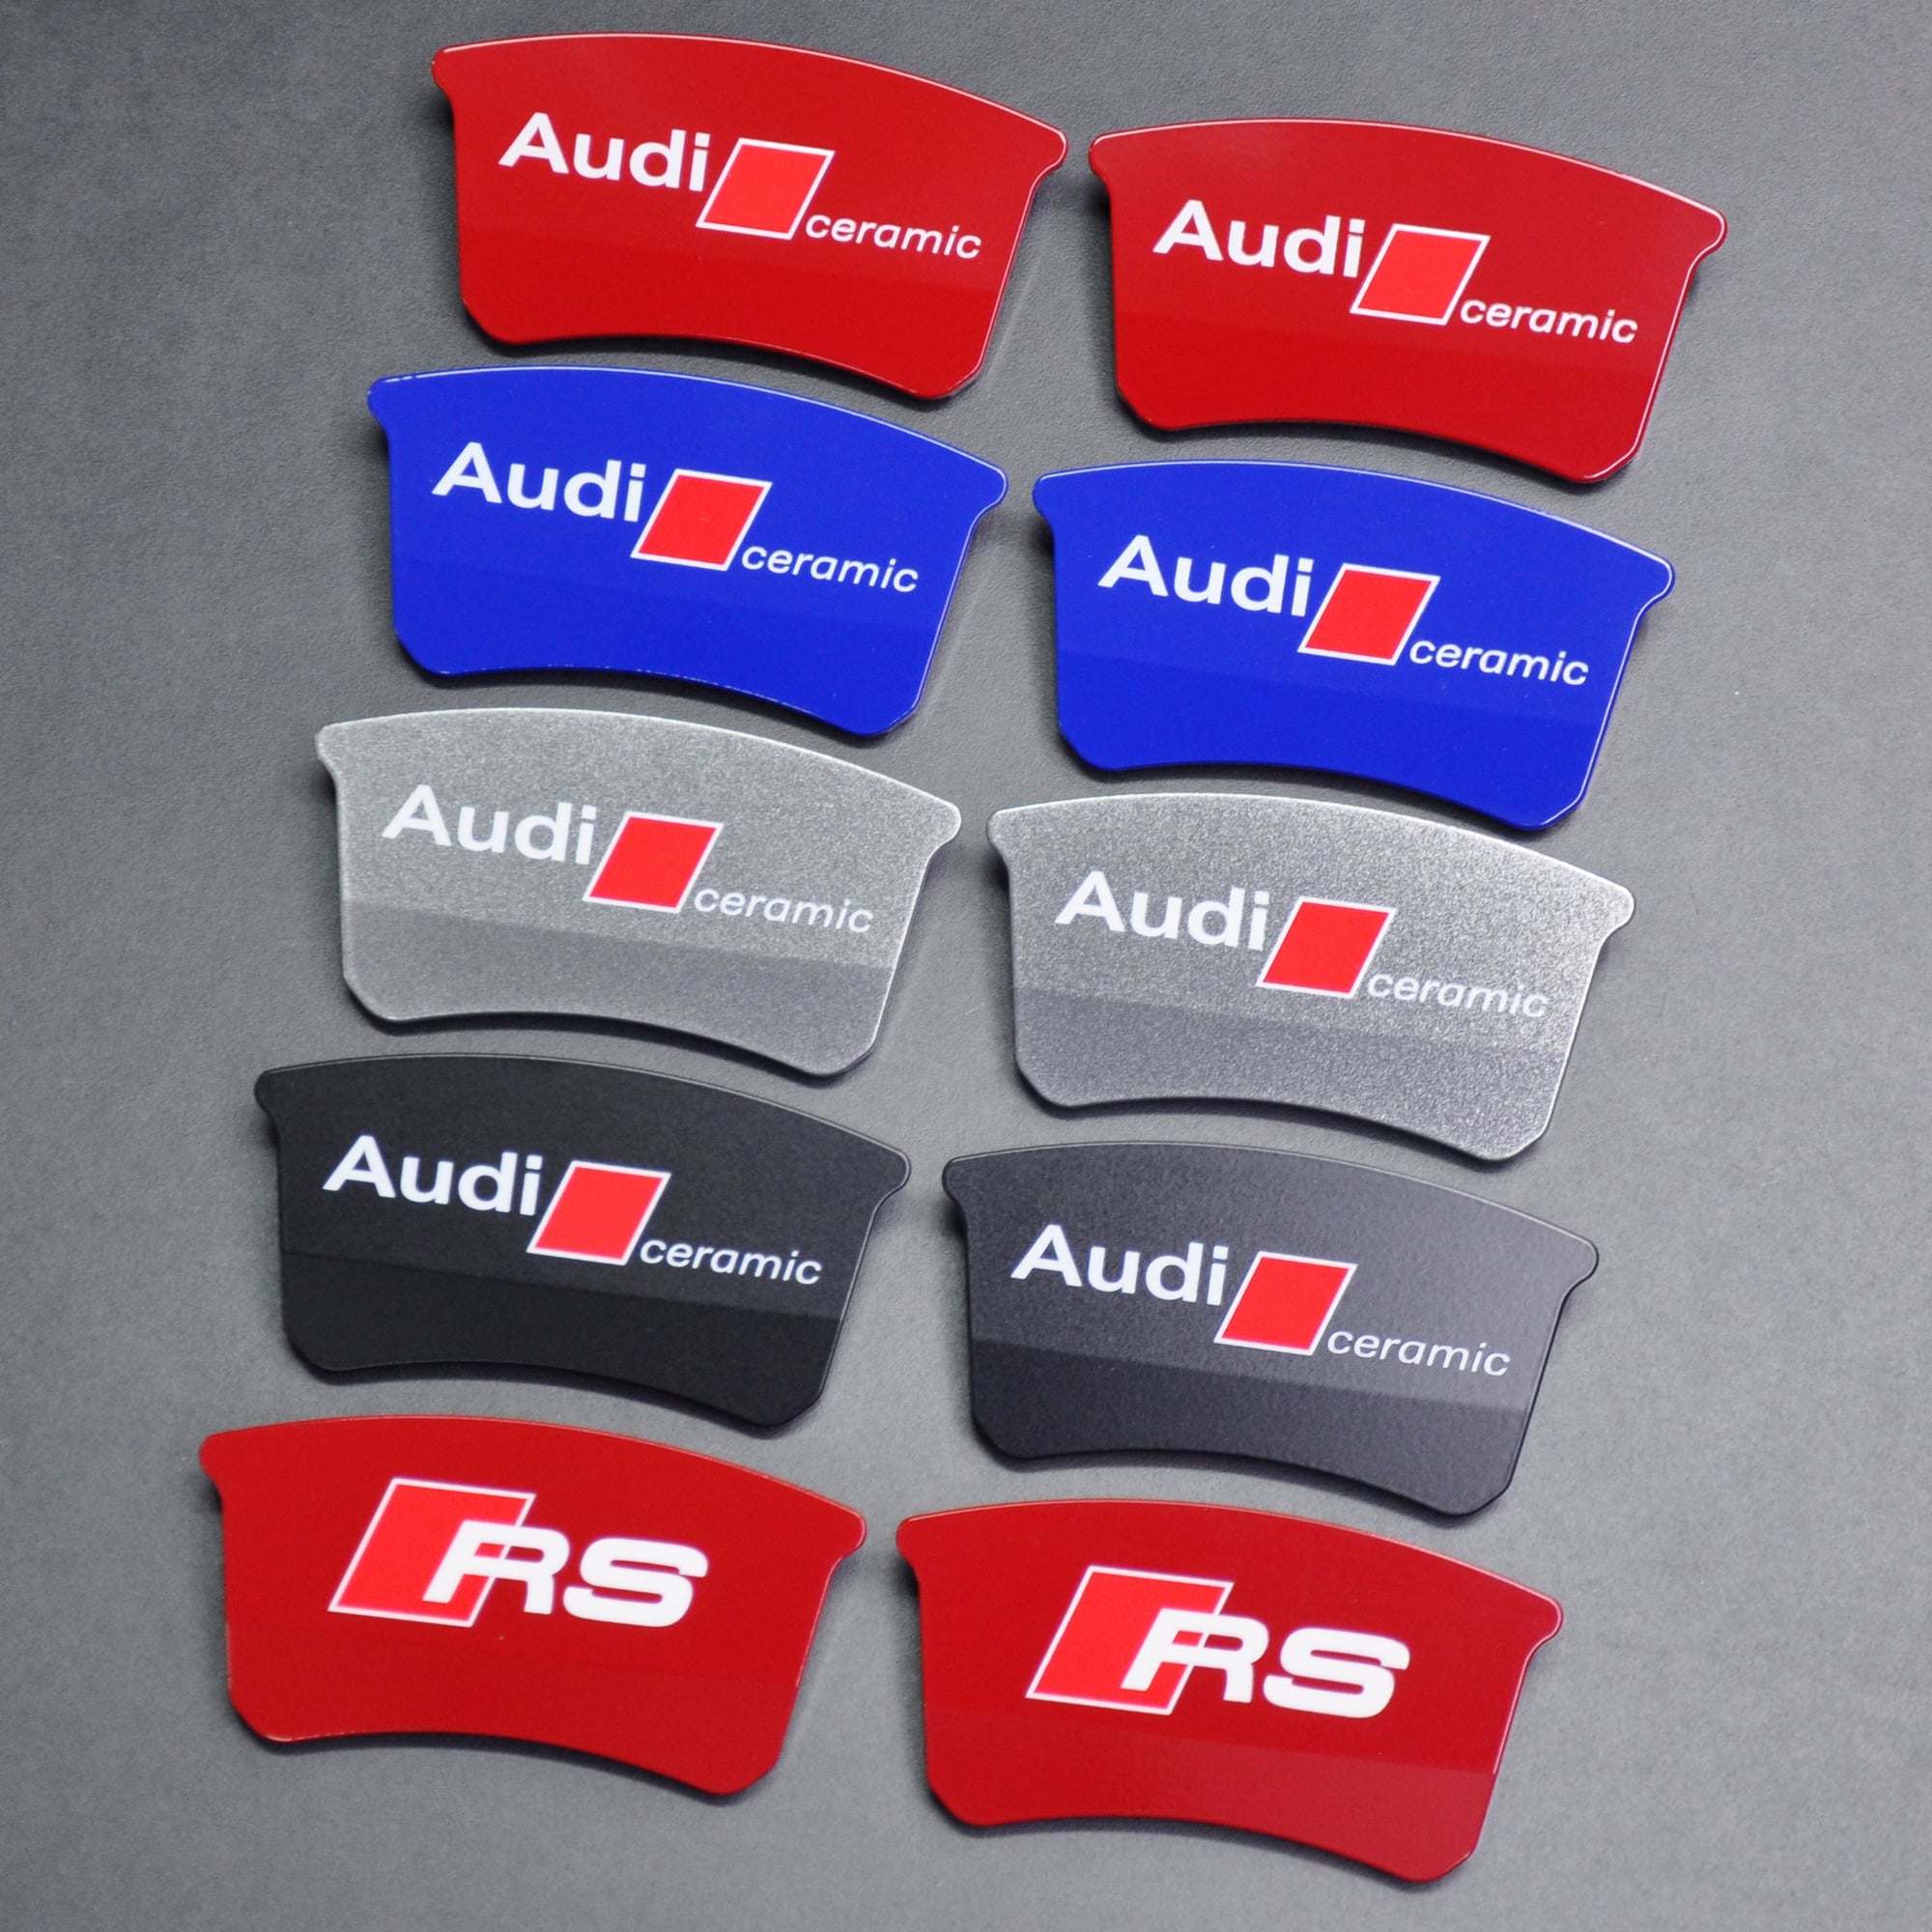 Brakes - Audi RS6, RS7 C8, RSQ8 Rear Color Matched Caliper Covers for Steel... - New - All Years  All Models - All Years  All Models - All Years  All Models - All Years  All Models - All Years  All Models - All Years  All Models - Eu, Slovenia